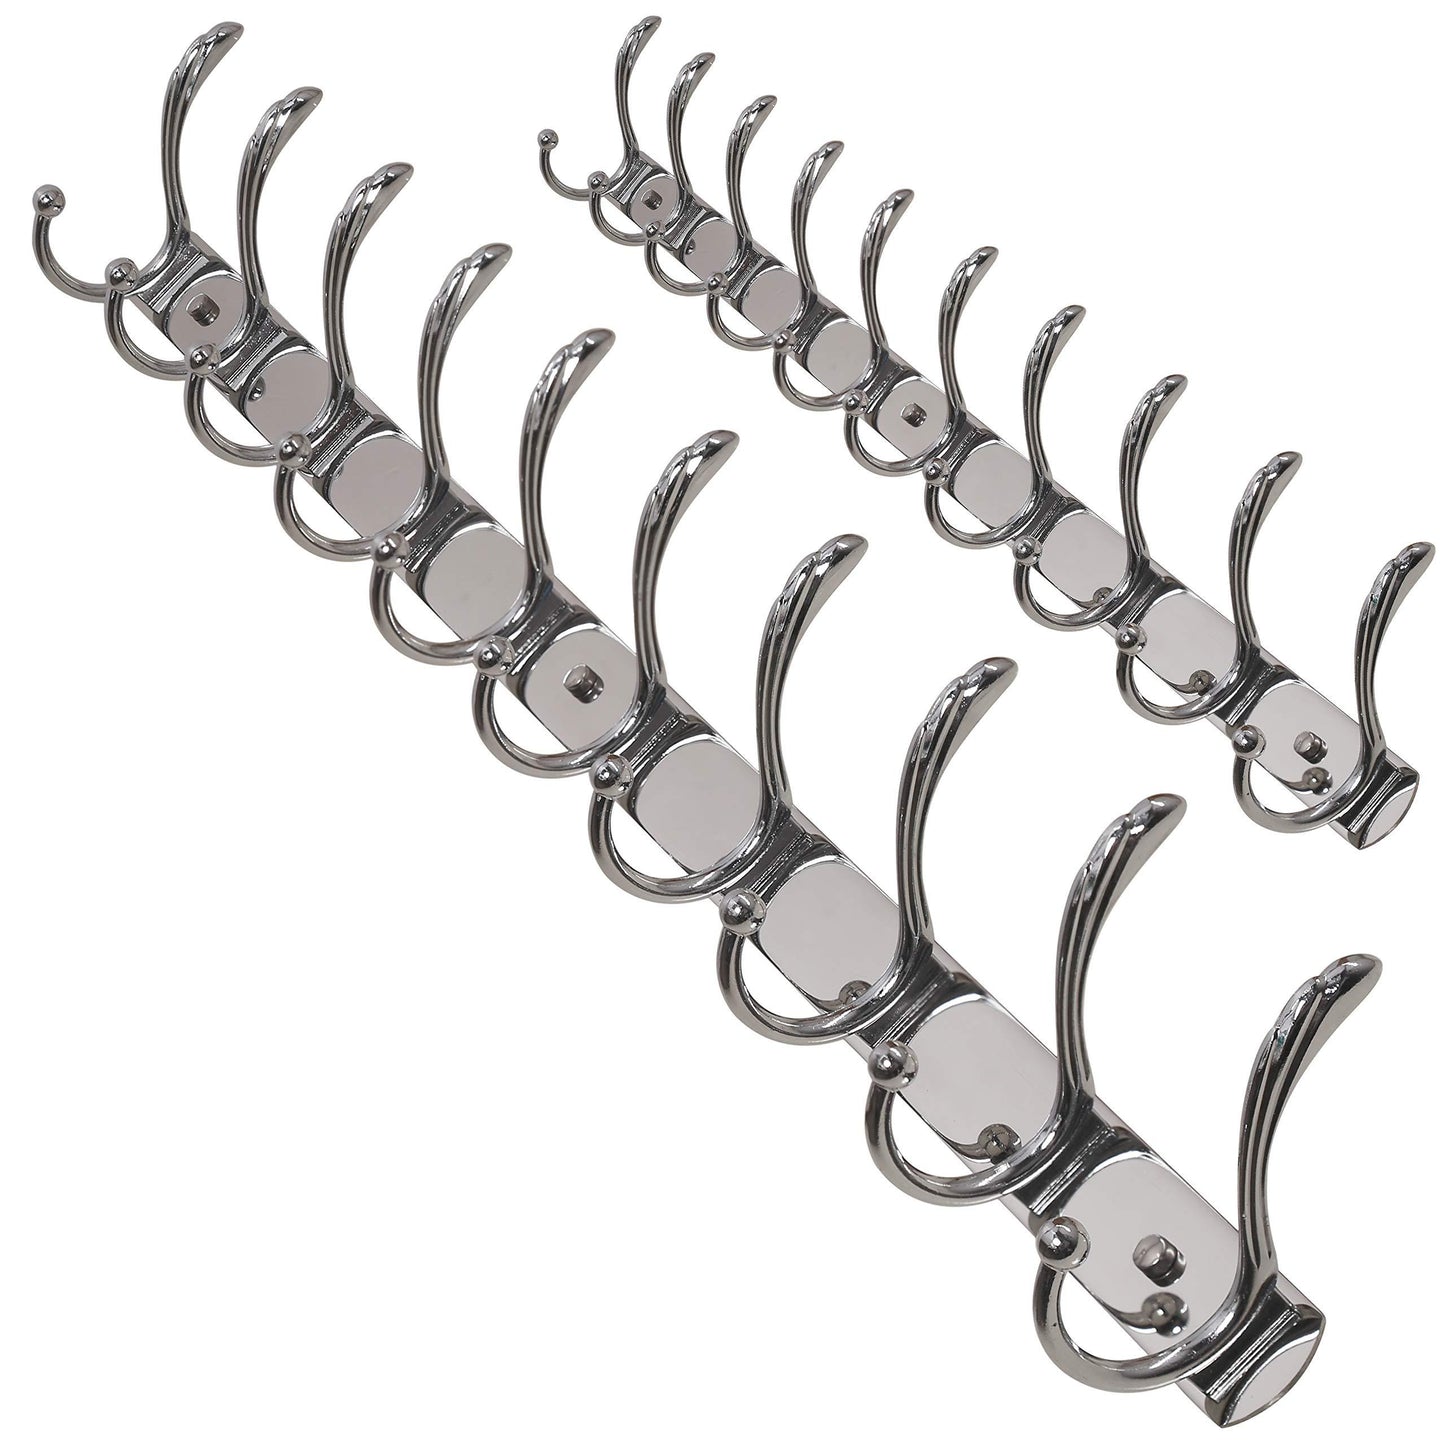 Dseap Wall Mounted Coat Rack (10-Hooks): Heavy Duty, Stainless Steel, Metal Coat Hook for Clothes Towel Hat Robes Mudroom Bathroom Entryway (Cock Tail, Chromed, 2 Packs)